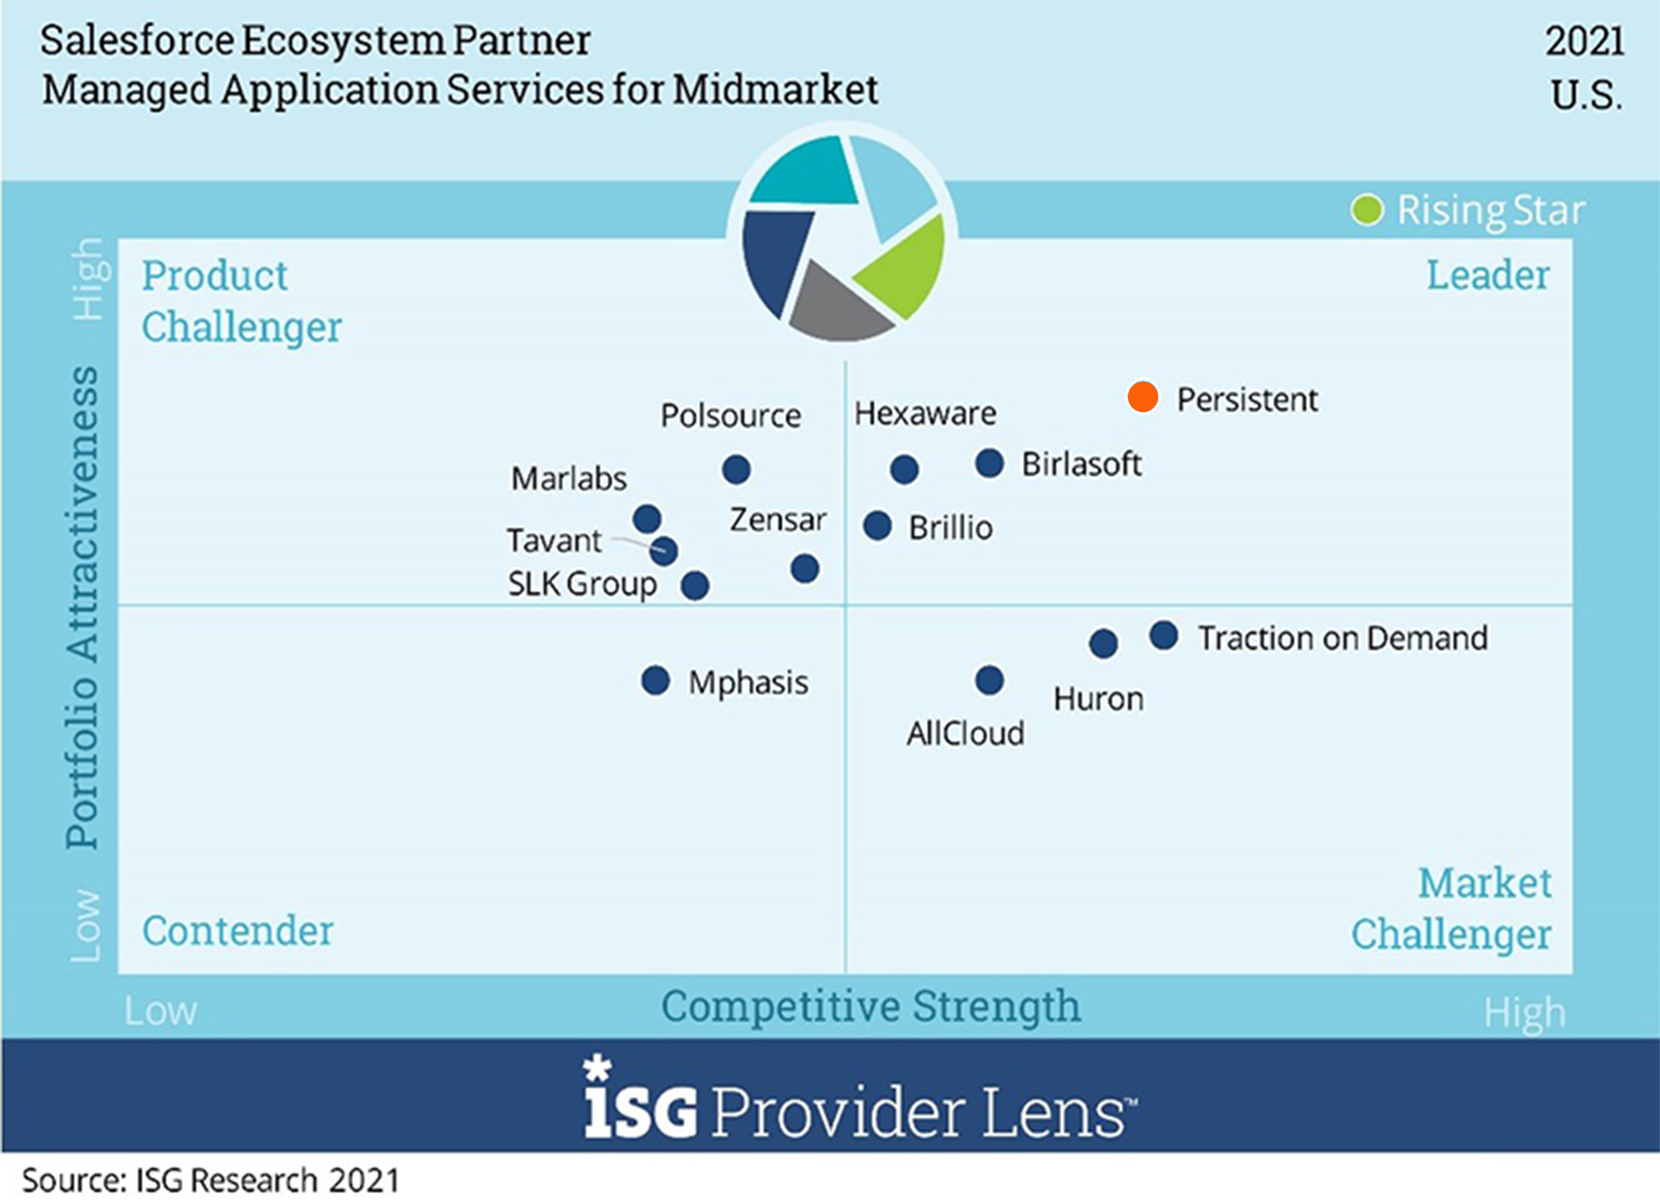 ‘Leader’ in Managed Application Services – Midmarket in U.S. and Germany